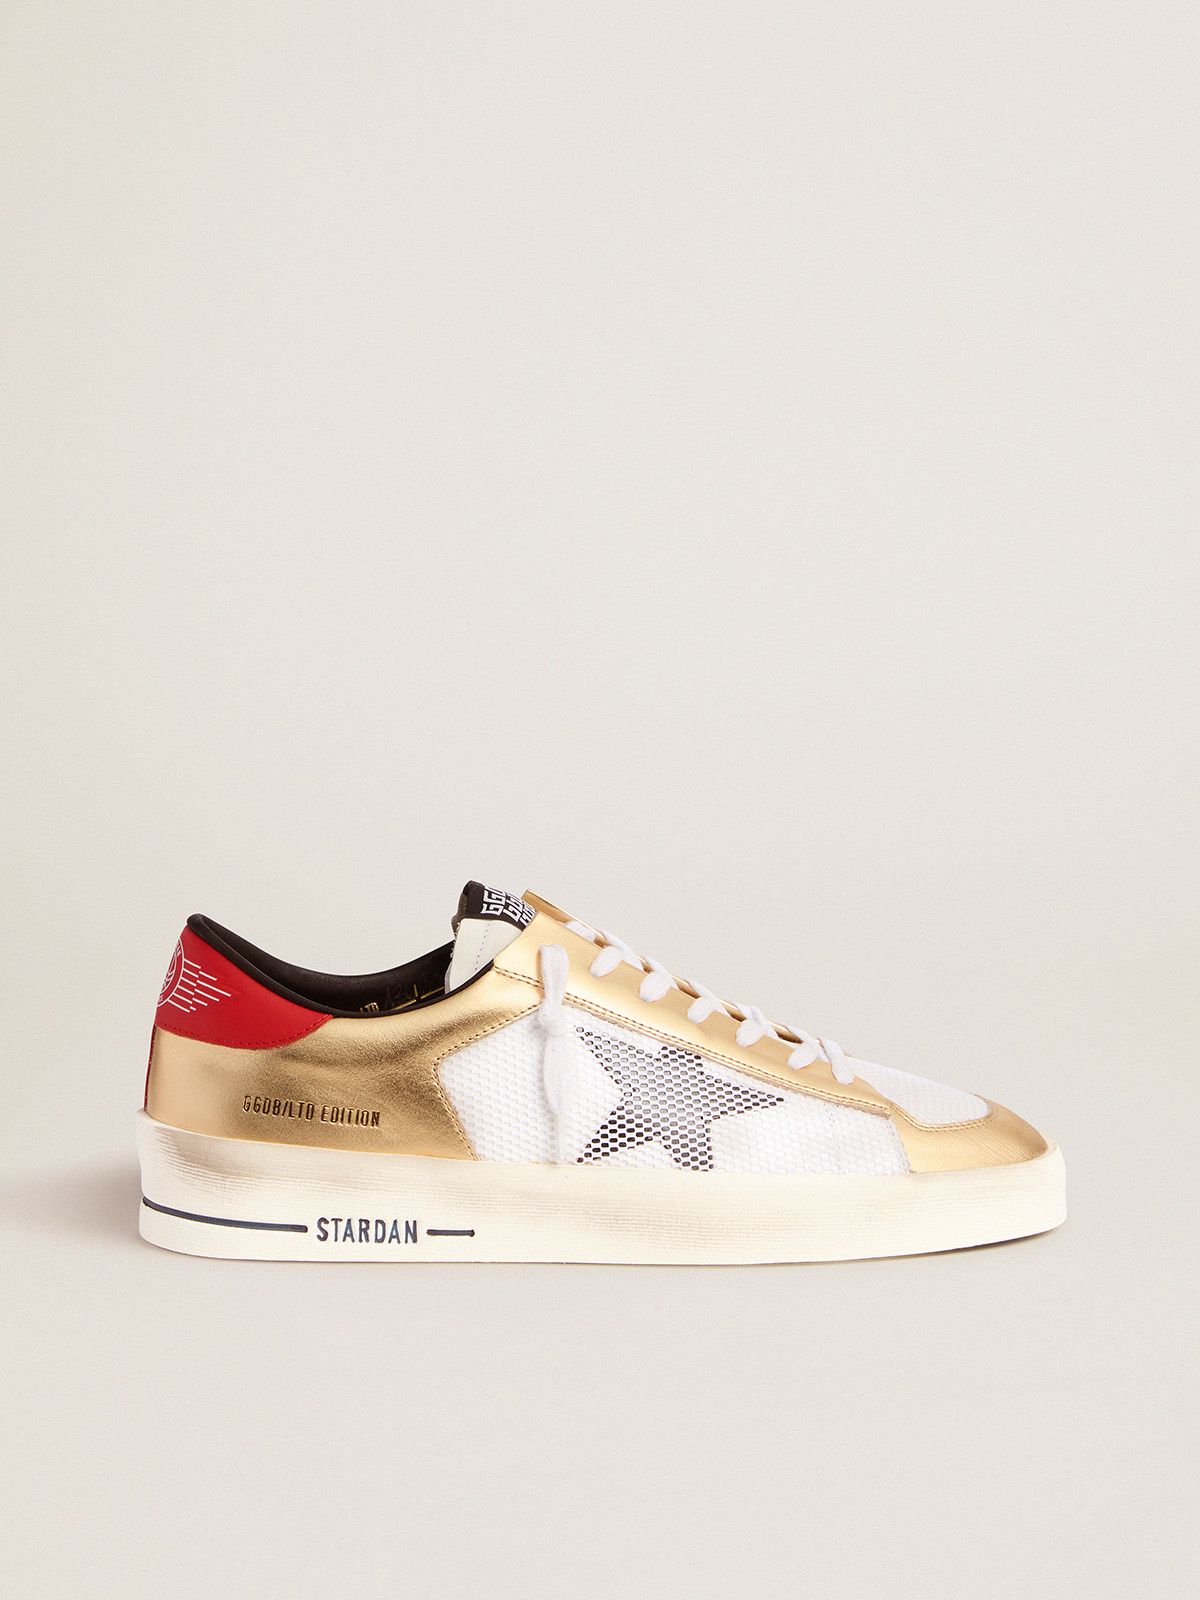 Women's Limited Edition Stardan sneakers with gold inserts | 